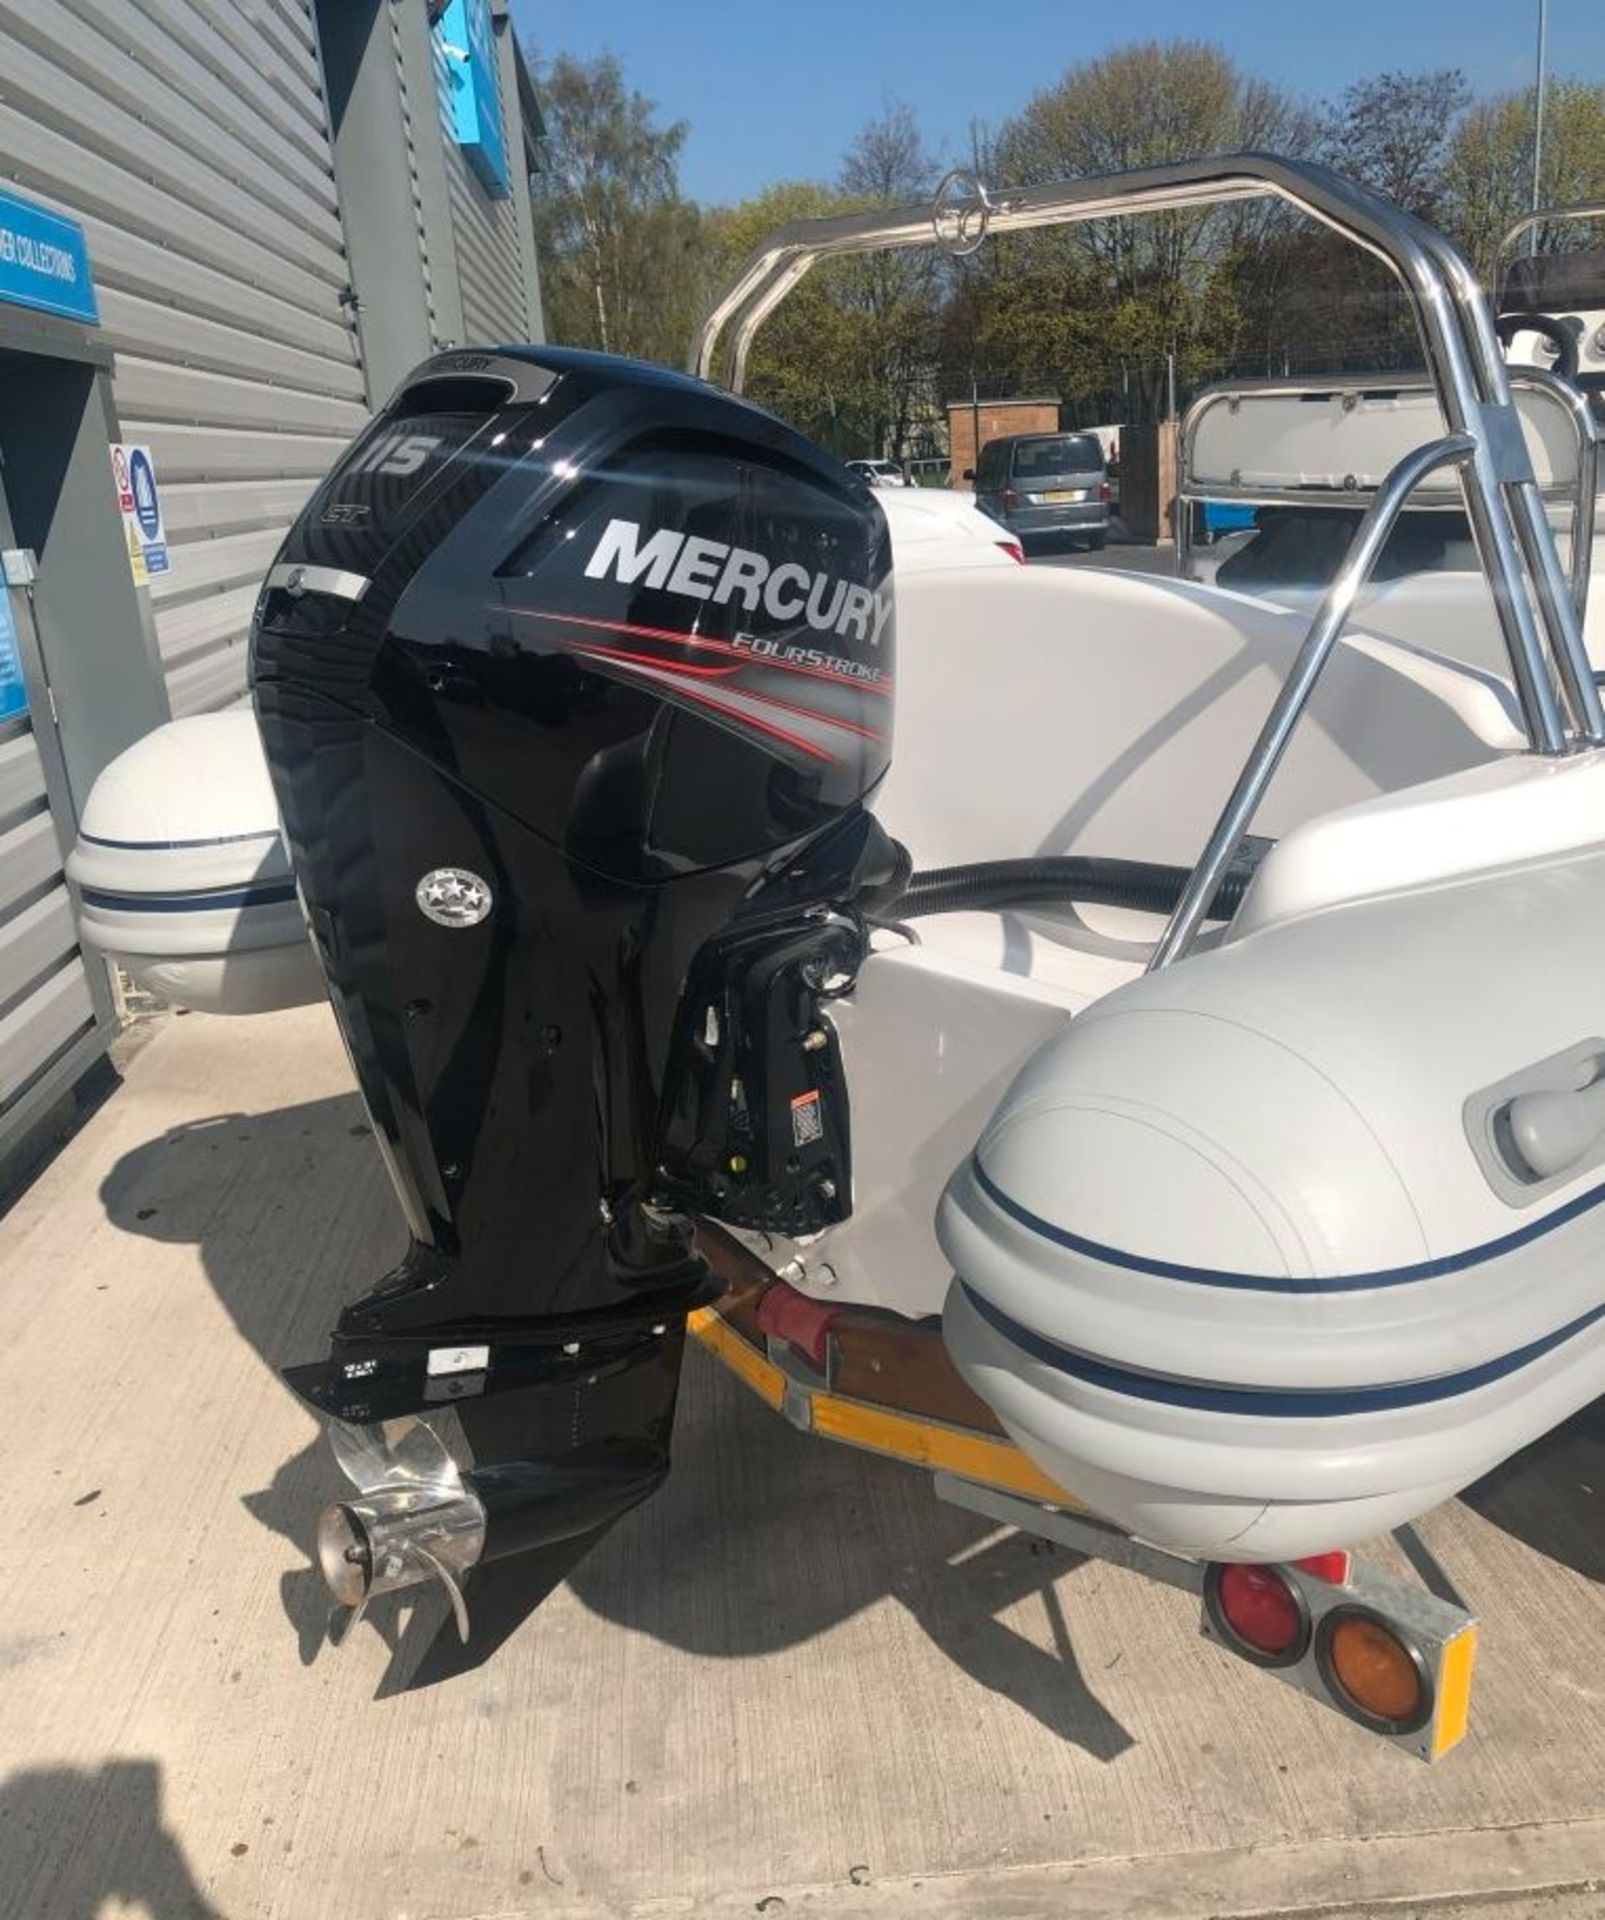 Infanta 5.8LRi Rib Complete With 115hp Mercury 4stroke and Trailer {104270} - Image 6 of 17